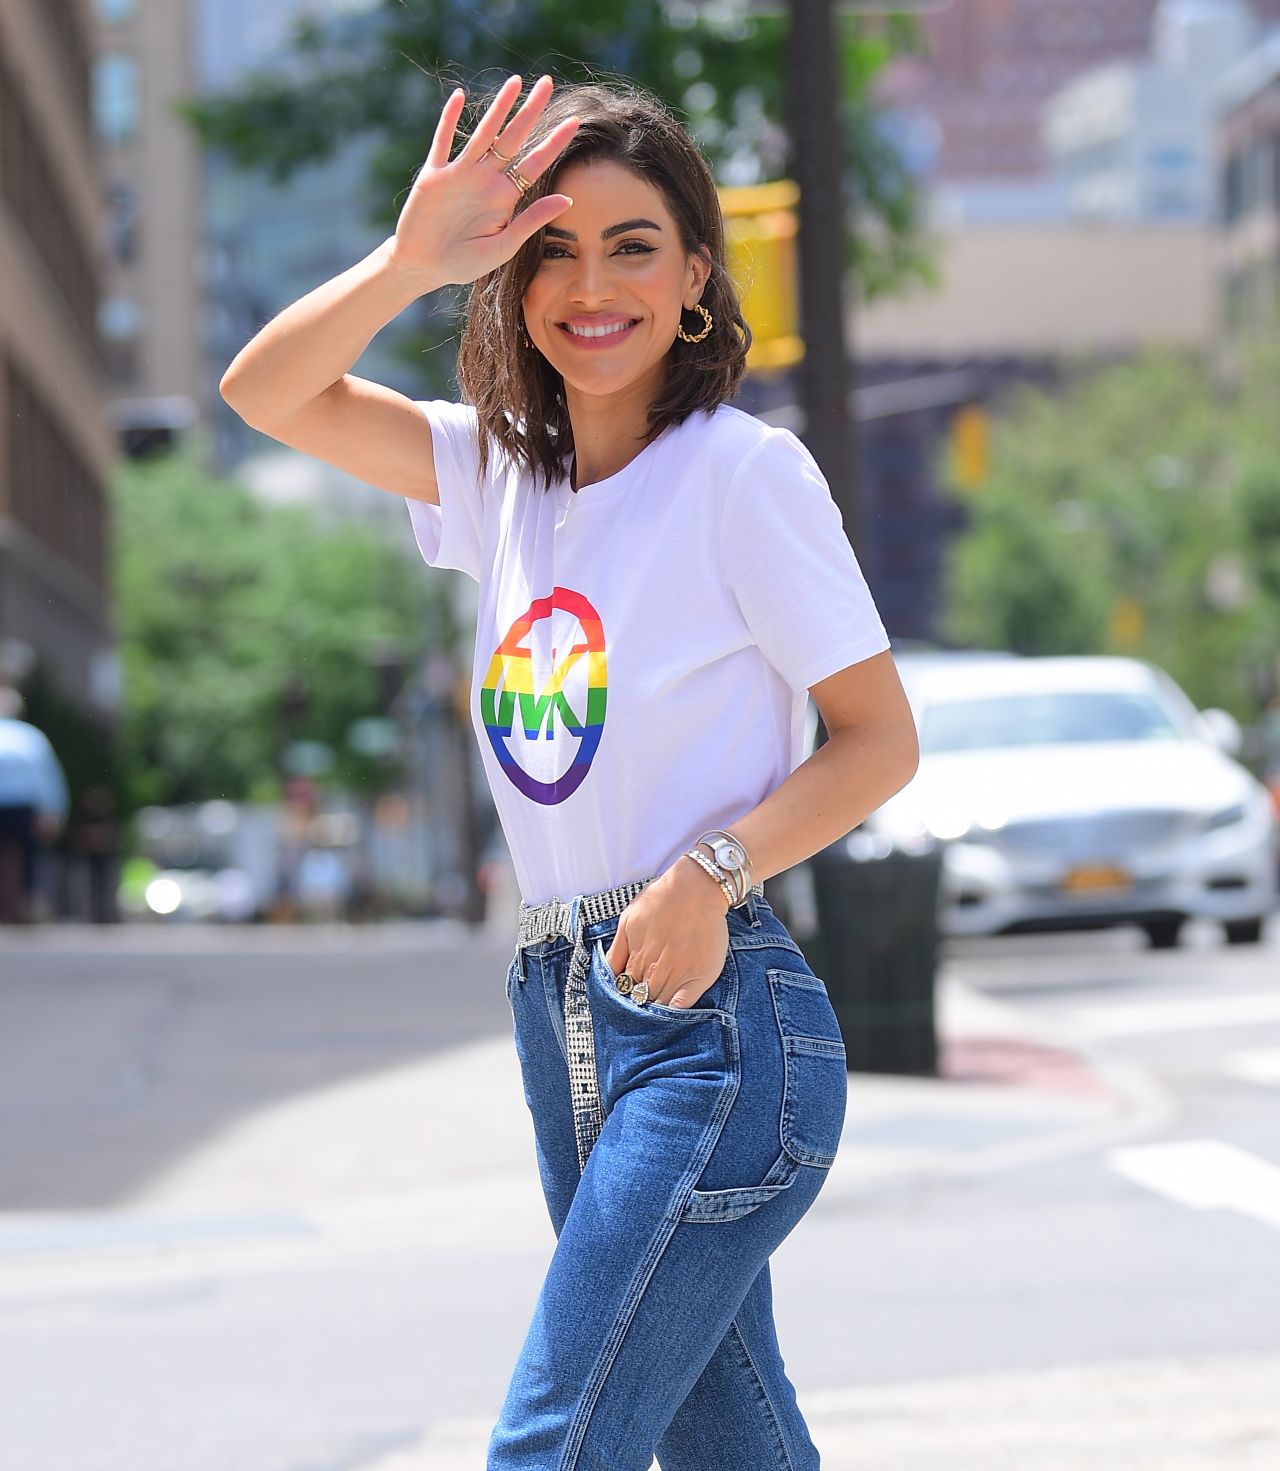 Camila Coehlo in Pride T-Shirt for Michael Kors Photoshoot in NYC 06/11/2019 â¢ CelebMafia